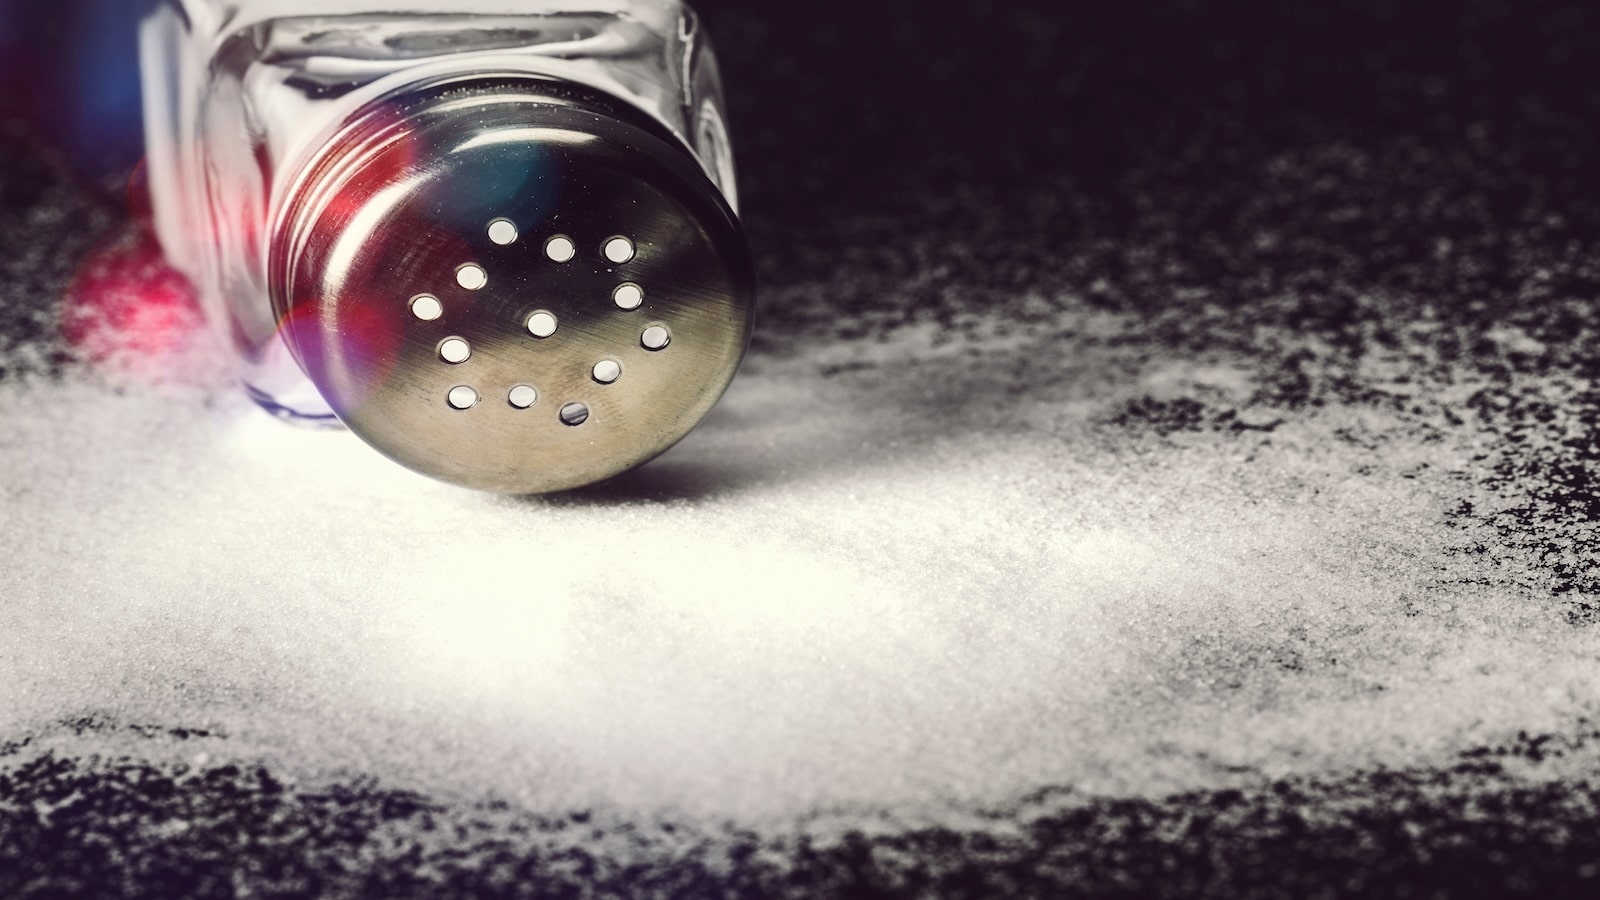 <p><span>This superstition originates from the idea that salt was a valuable commodity and spilling it was unlucky. Tossing it over your left shoulder was believed to blind the devil waiting there. Today, while the ritual is less common, it’s often performed playfully, especially in Western cultures, after spilling salt.</span></p>